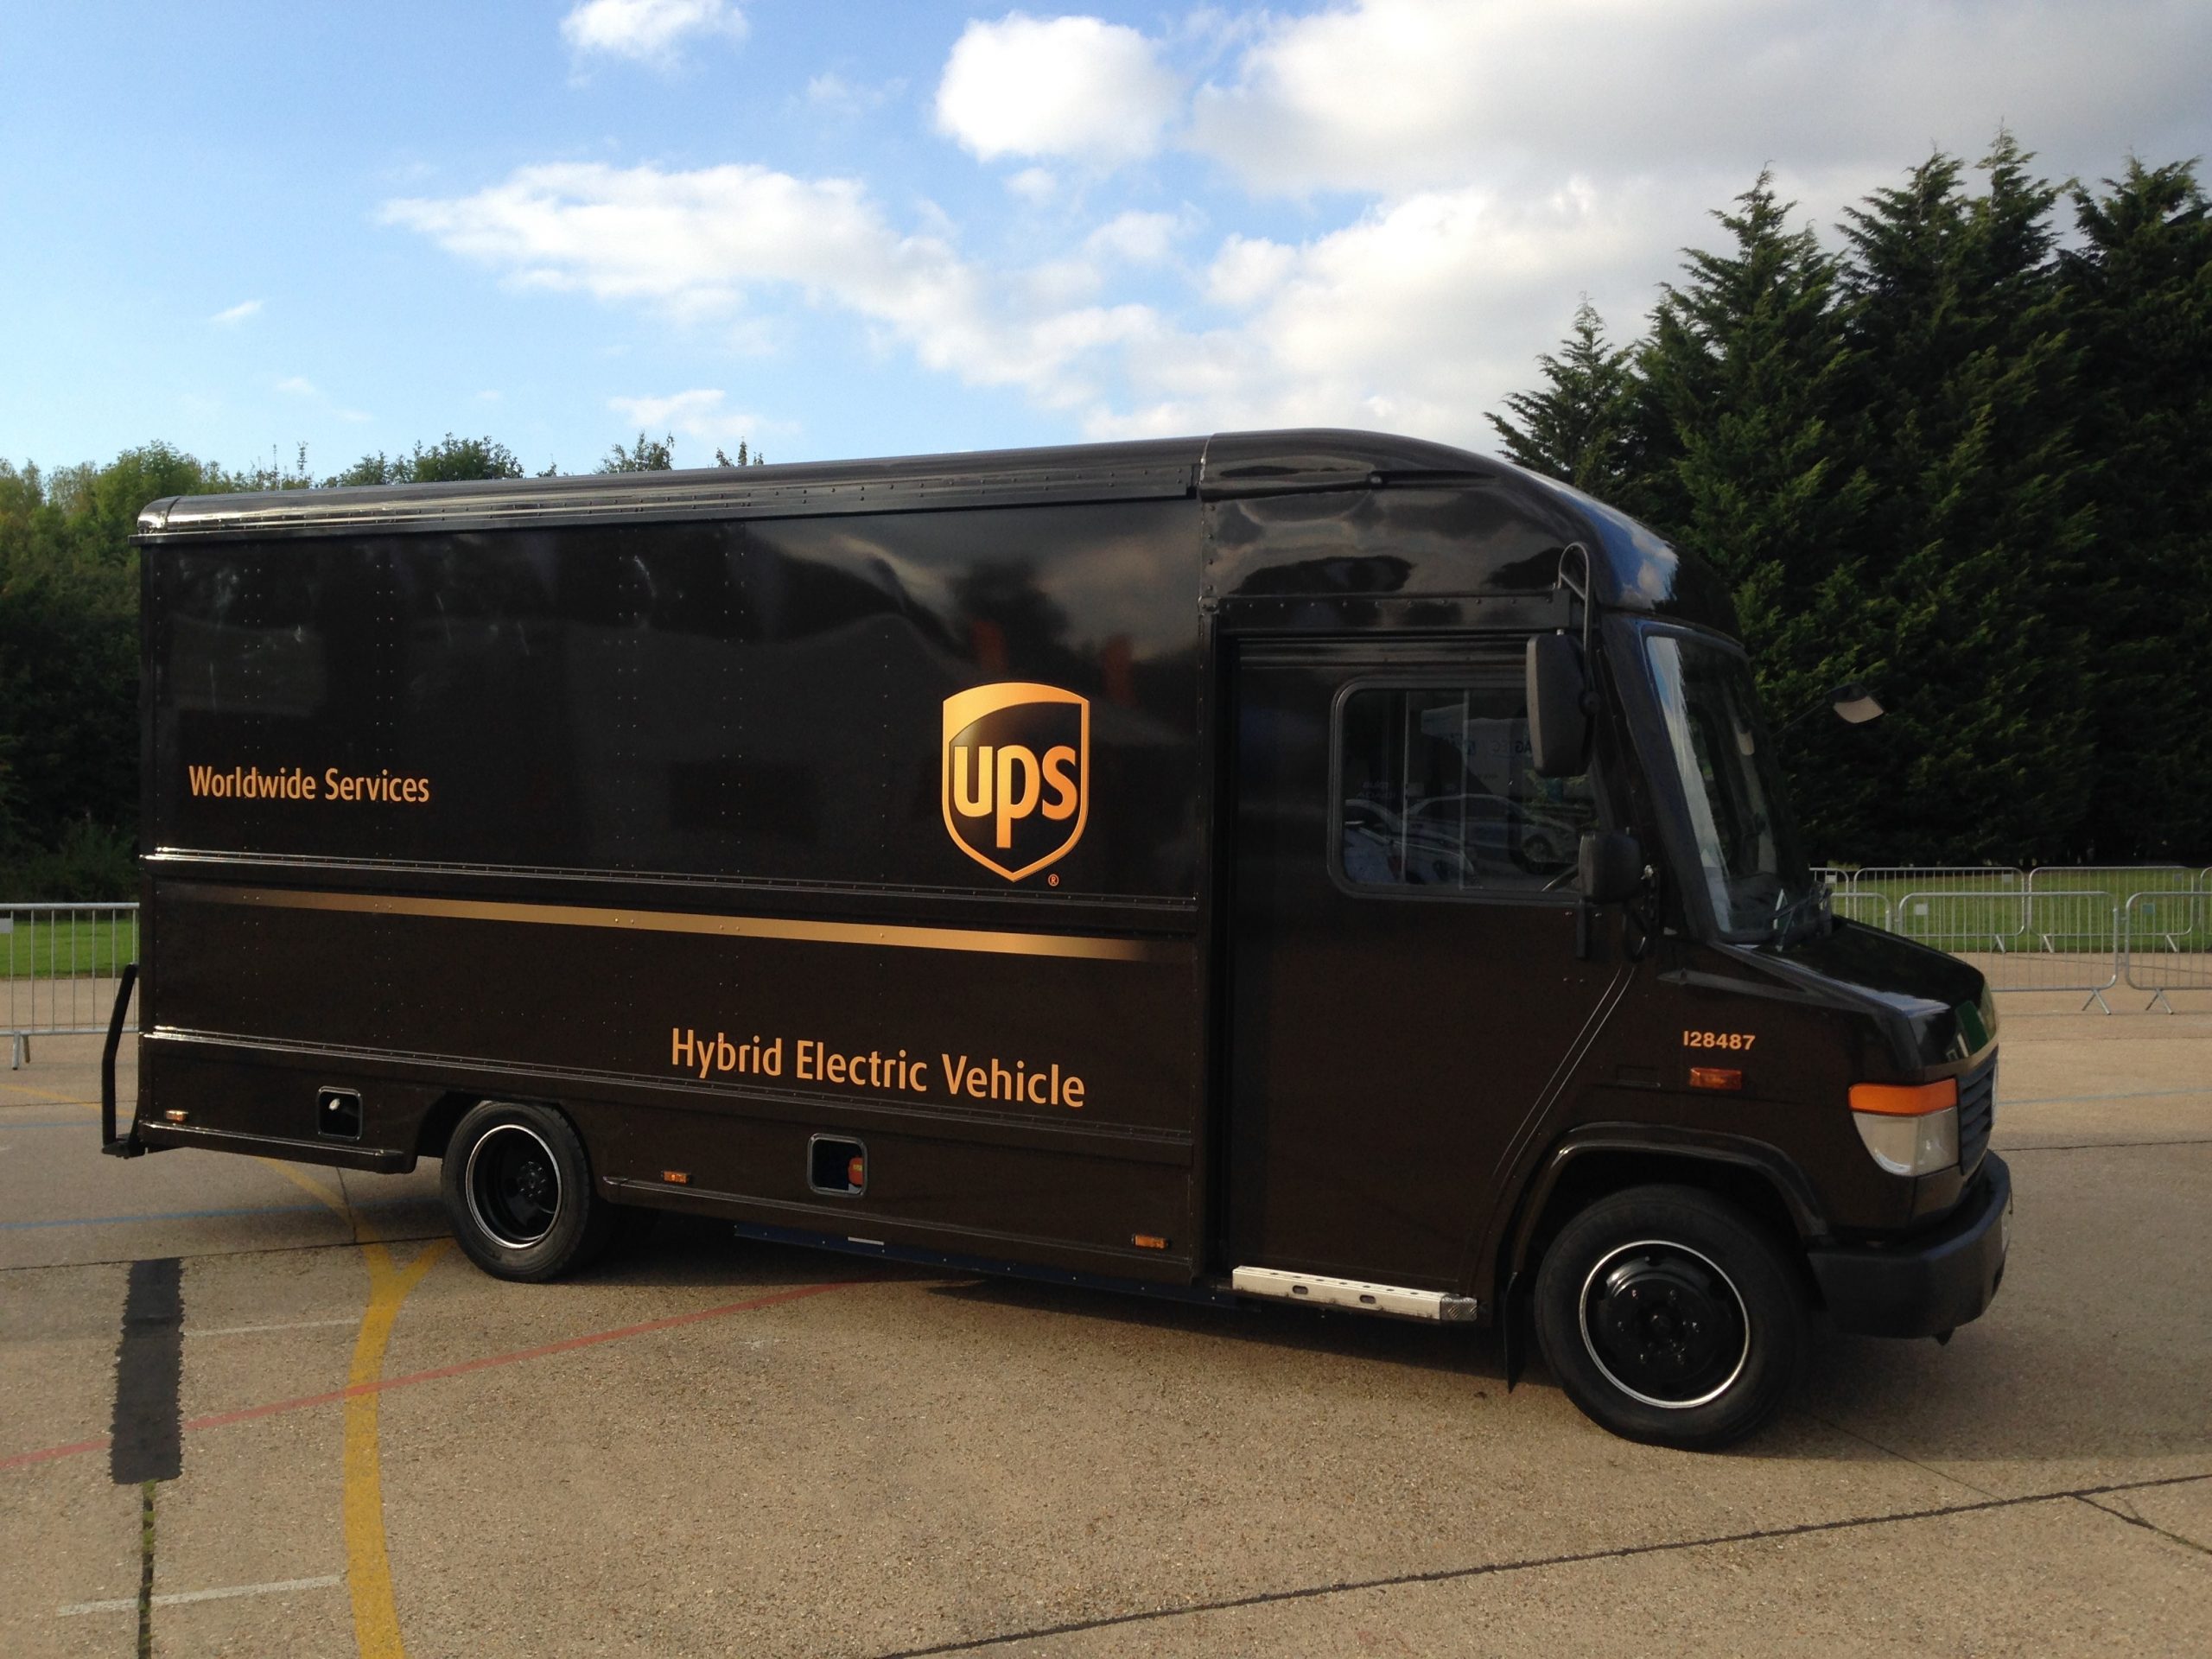 UPS trialling range-extended electric delivery vehicle in UK